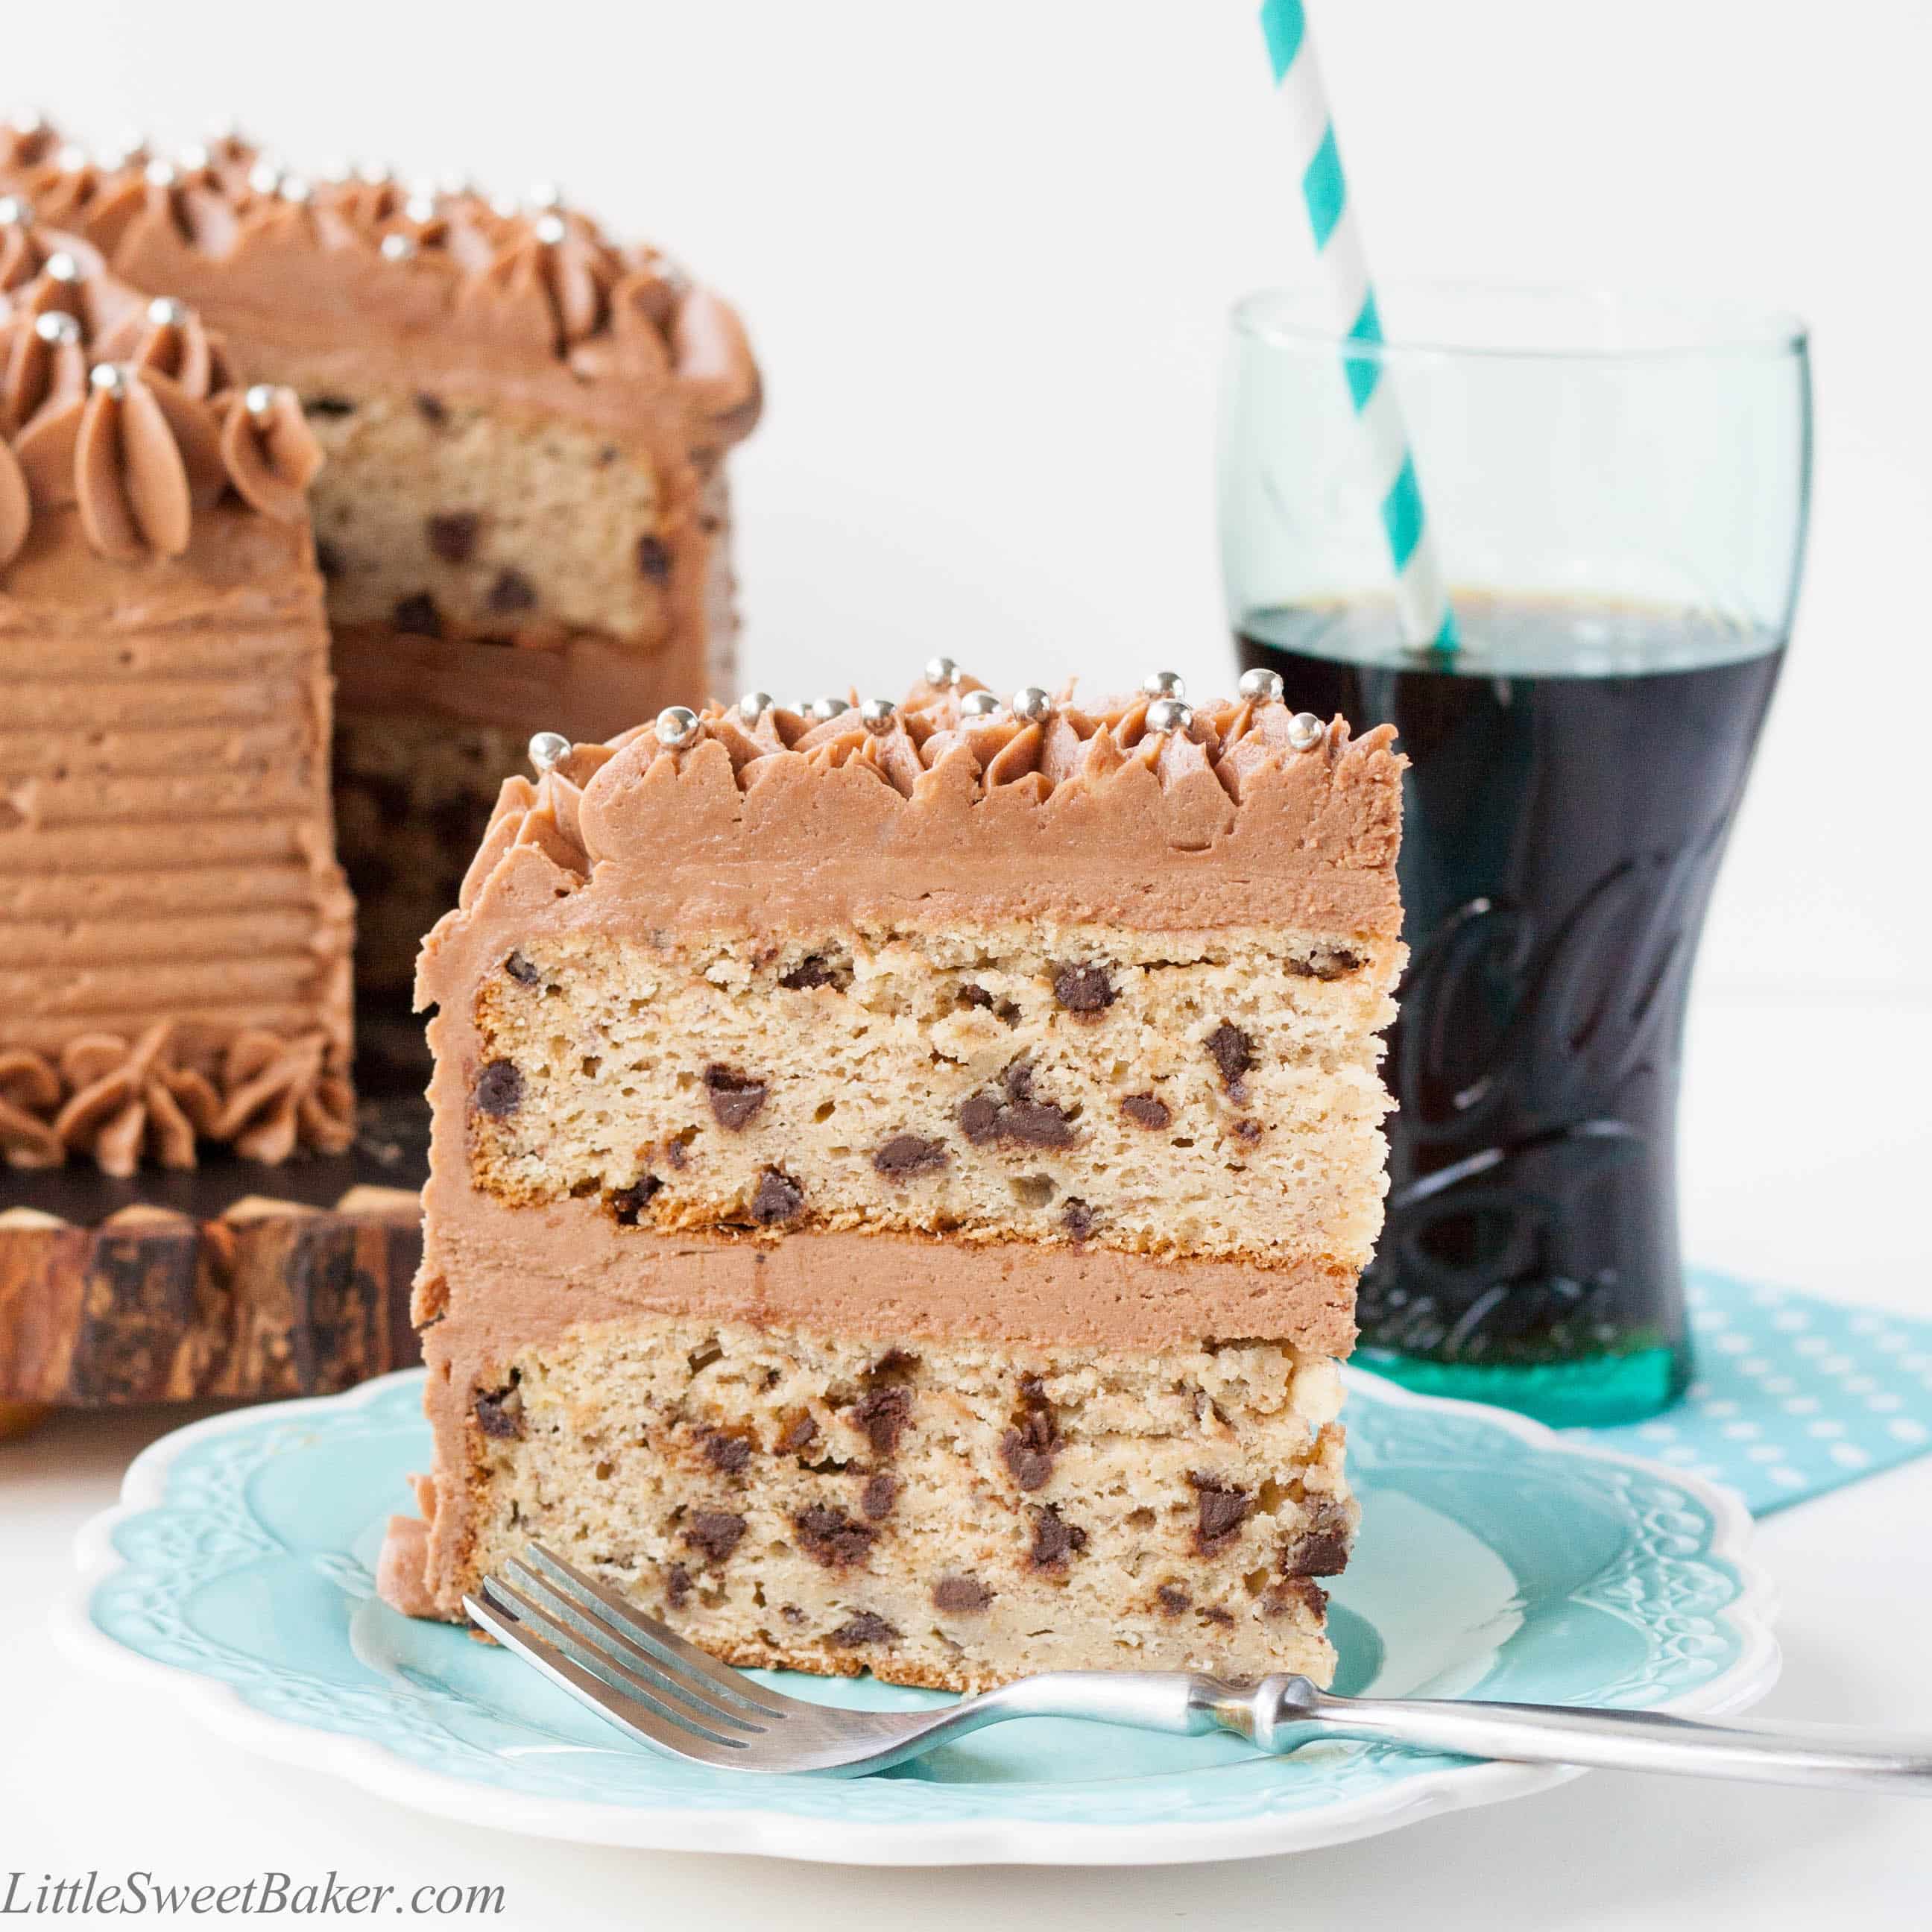 BANANA CHOCOLATE CHIP CAKE WITH MILK CHOCOLATE FROSTING. A deliciously moist chocolate chip banana cake surrounded with a real milk chocolate buttercream.